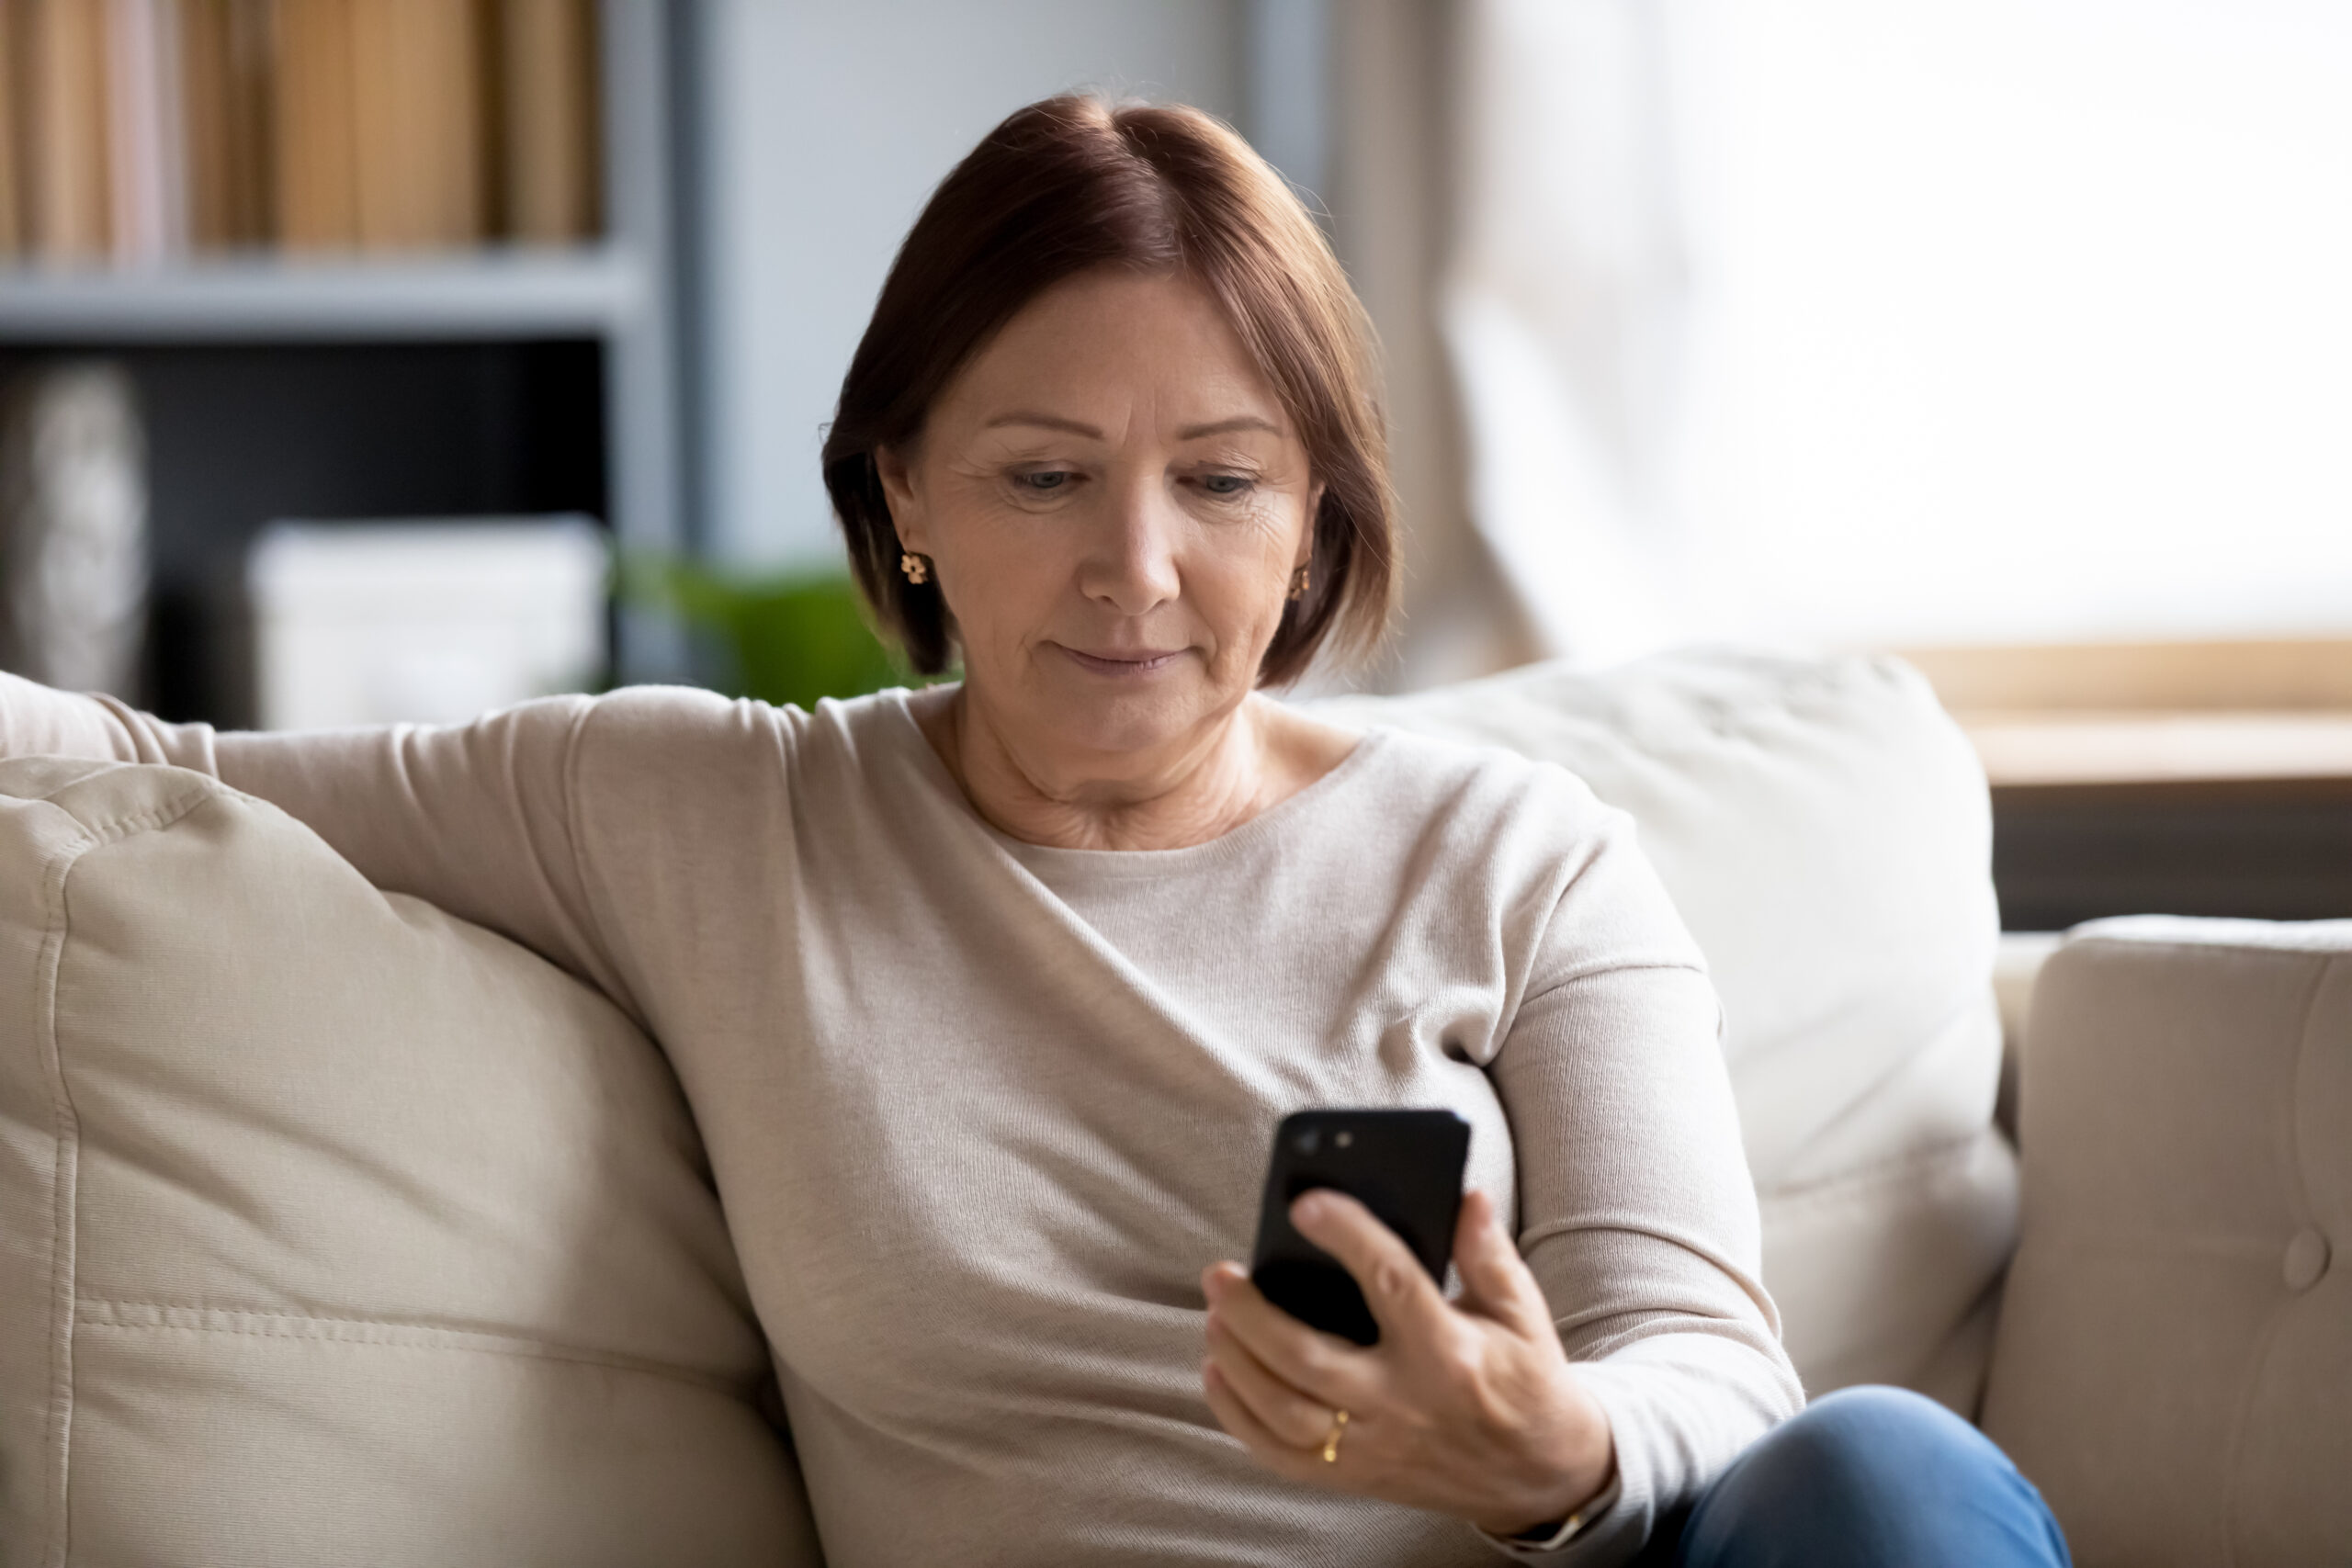 Middle aged woman sitting on couch looking at a smart phone.